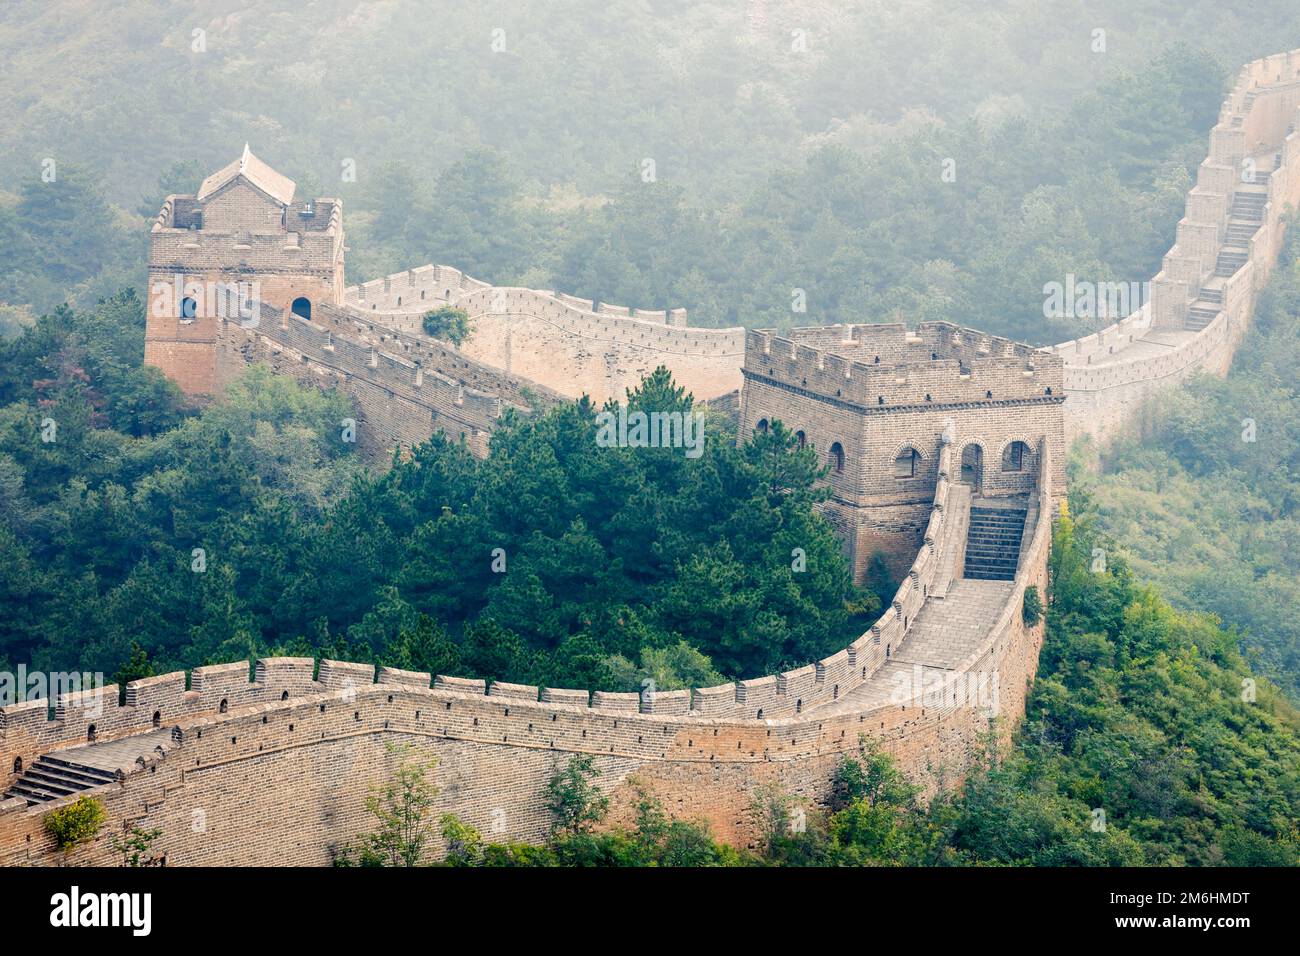 1,195 Great Wall Of China Snow Stock Photos, High-Res Pictures, and Images  - Getty Images